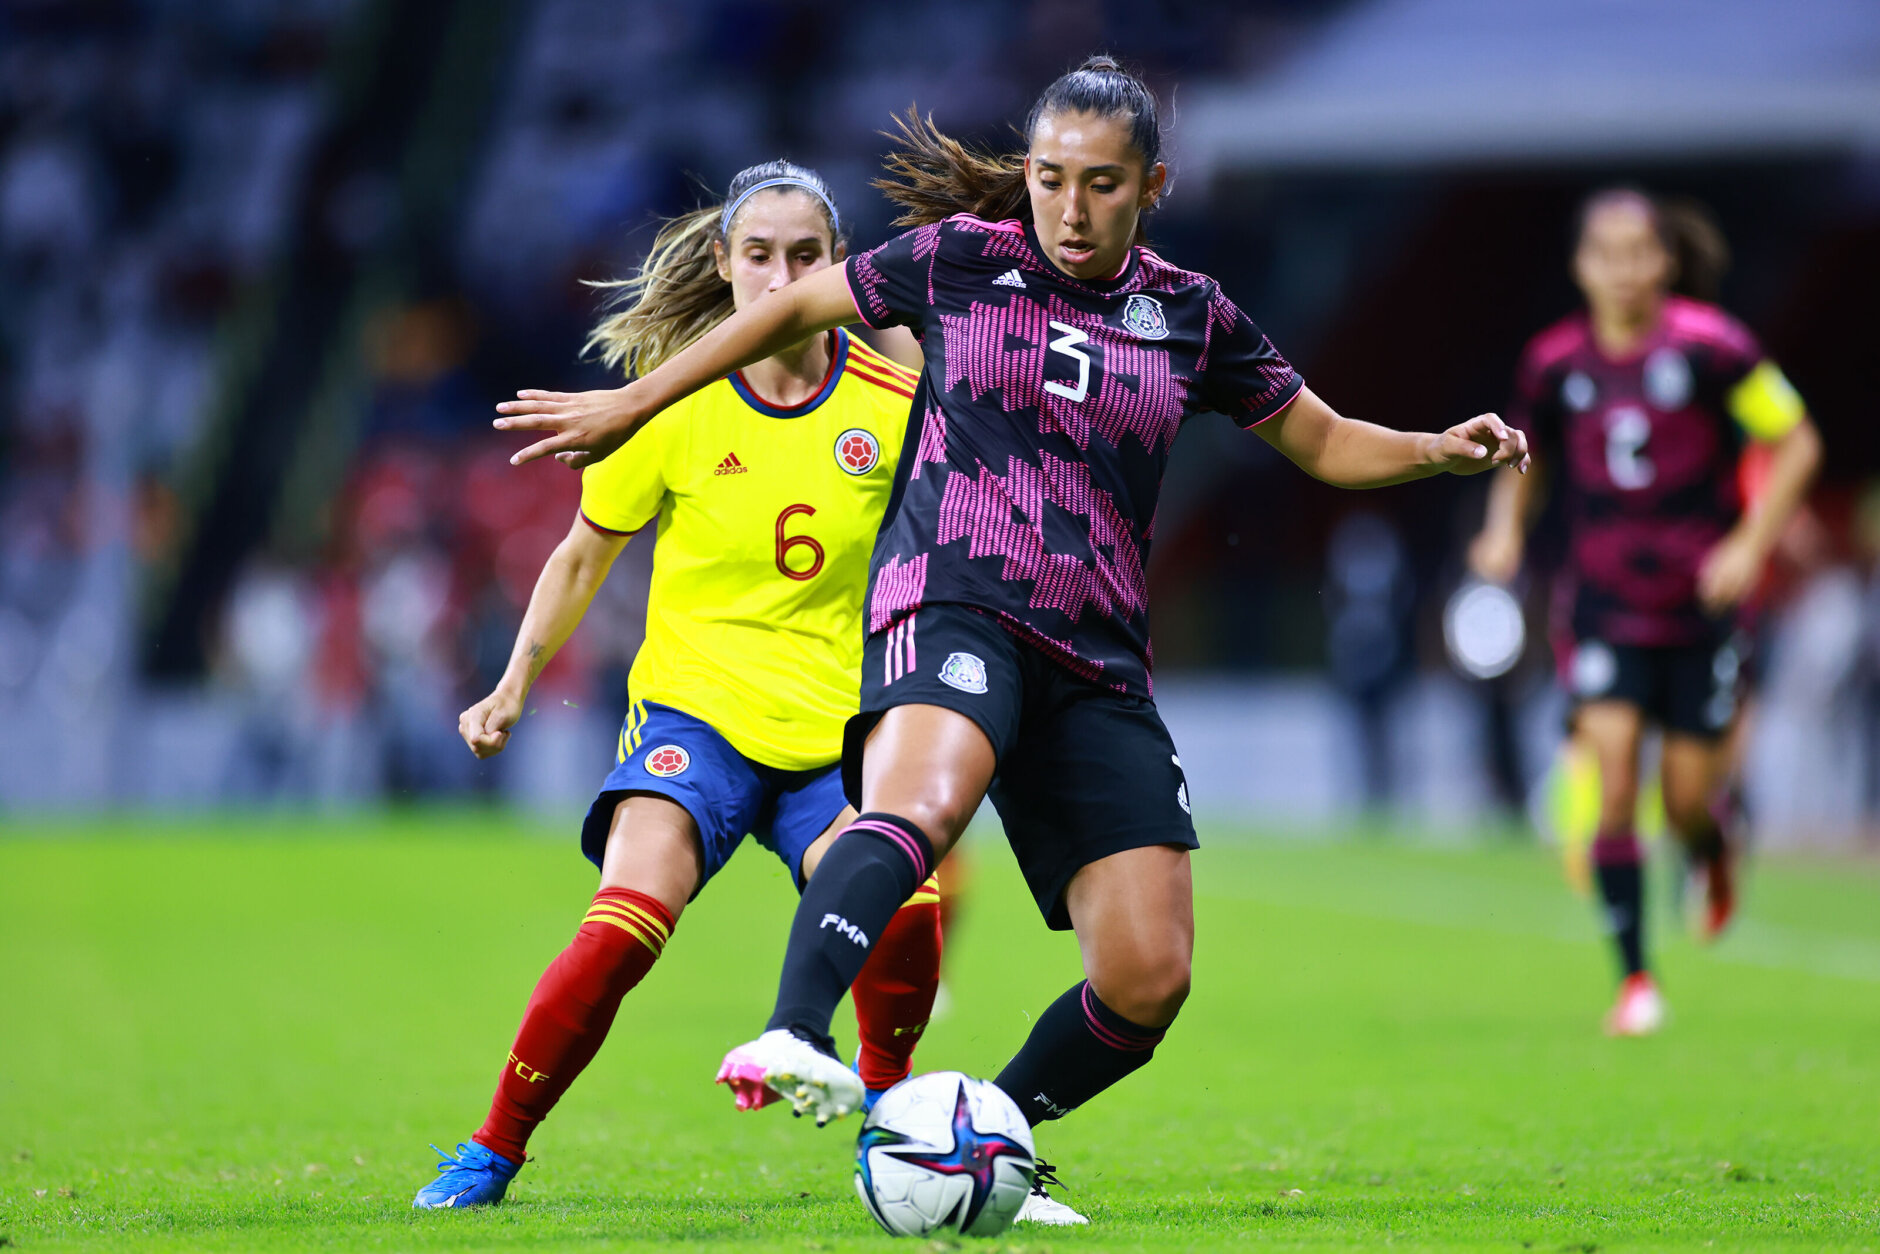 MEXICO CITY, MEXICO - SEPTEMBER 21: Karina Rodriguez of Mexico battles for possesion with Daniela Montoya of Colombia during the women's international friendly between Mexico and Colombia at Azteca Stadium on September 21, 2021 in Mexico City, Mexico. (Photo by Hector Vivas/Getty Images)